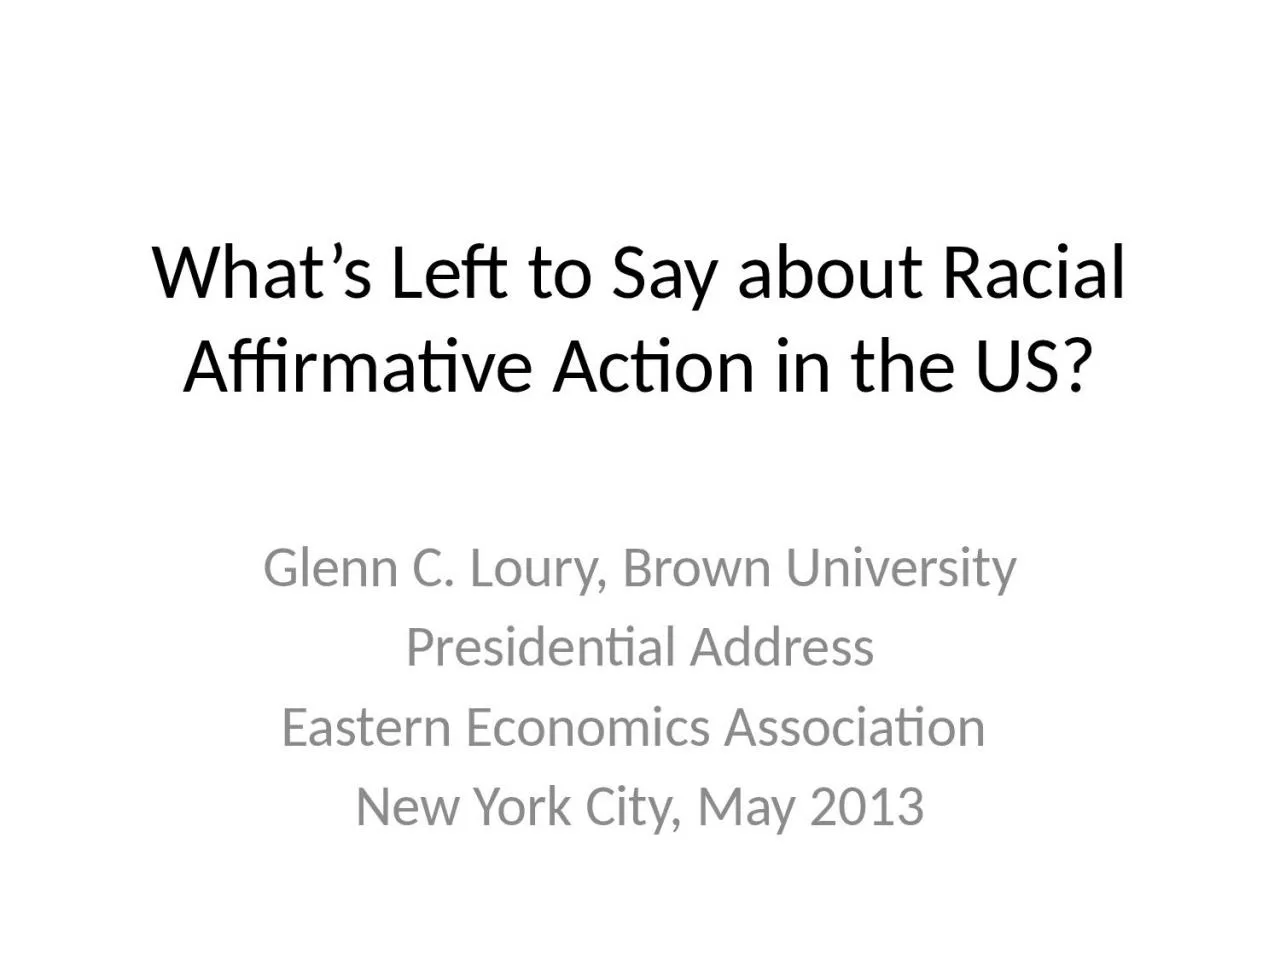 What’s Left to Say about Racial Affirmative Action in the US?